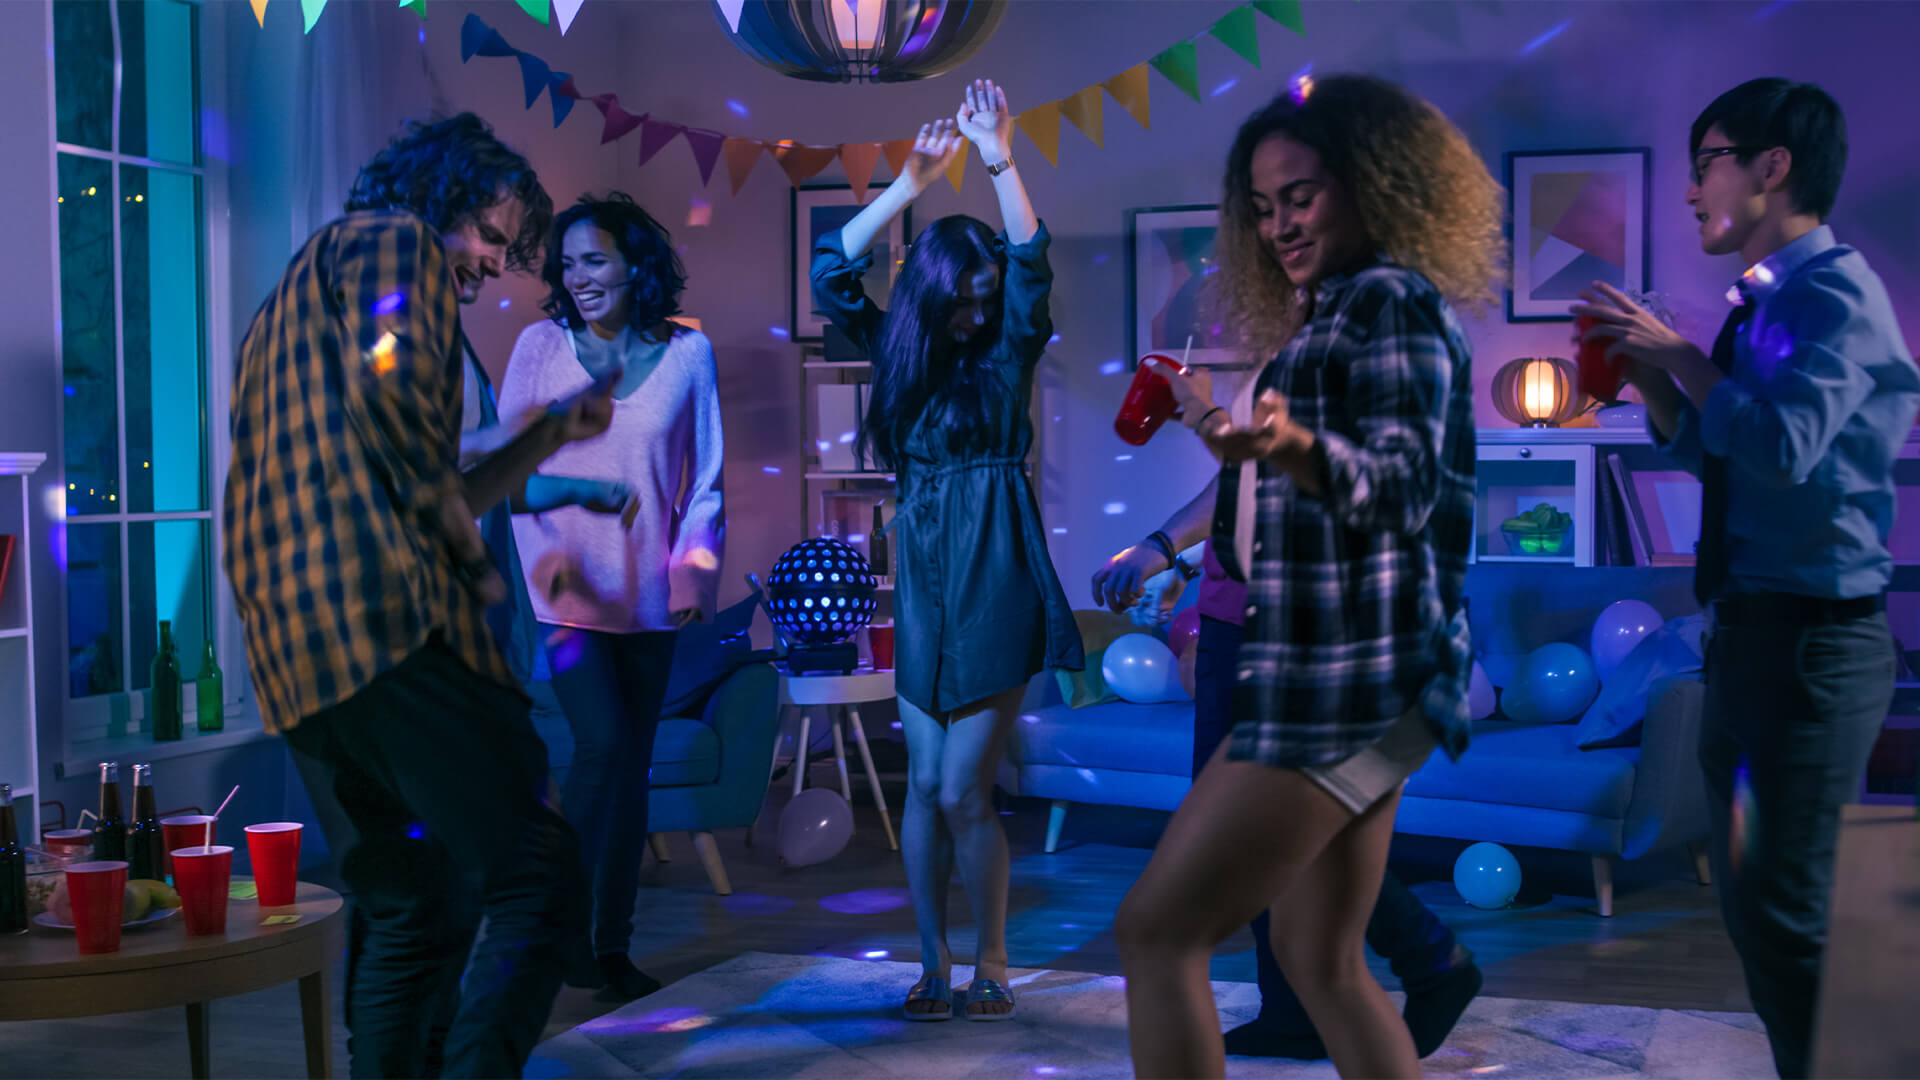 Diverse Group of Friends Have Fun, Dancing and Socializing